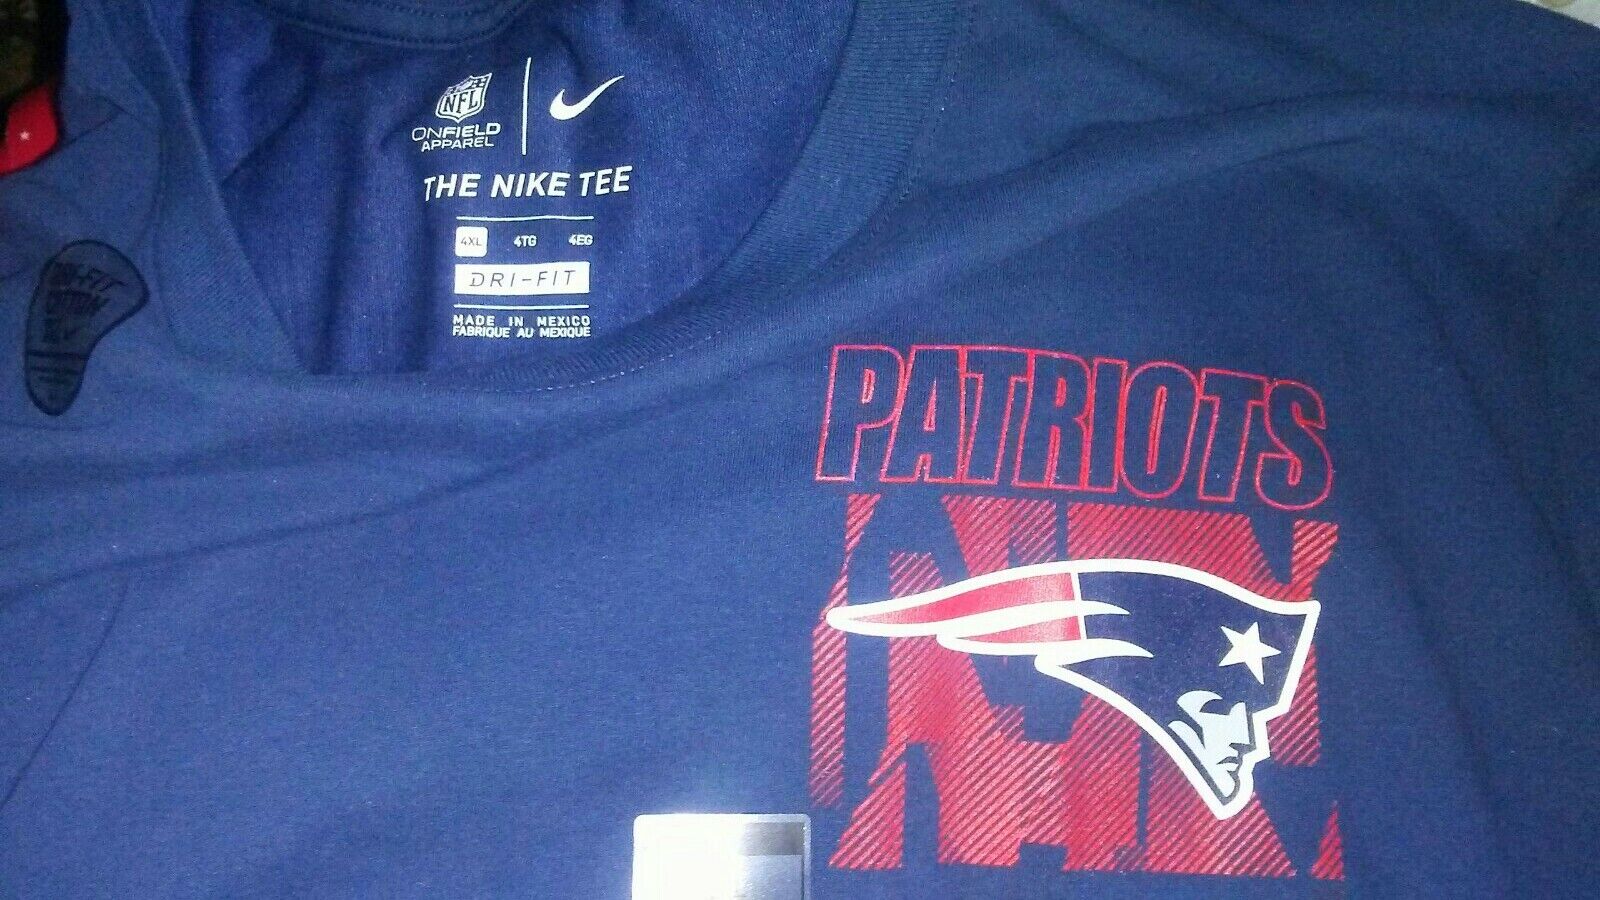 NAVY BLUE NEW ENGLAND PATRIOTS DRI-FIT T SHIRT 4XL NEW WITH TAGS